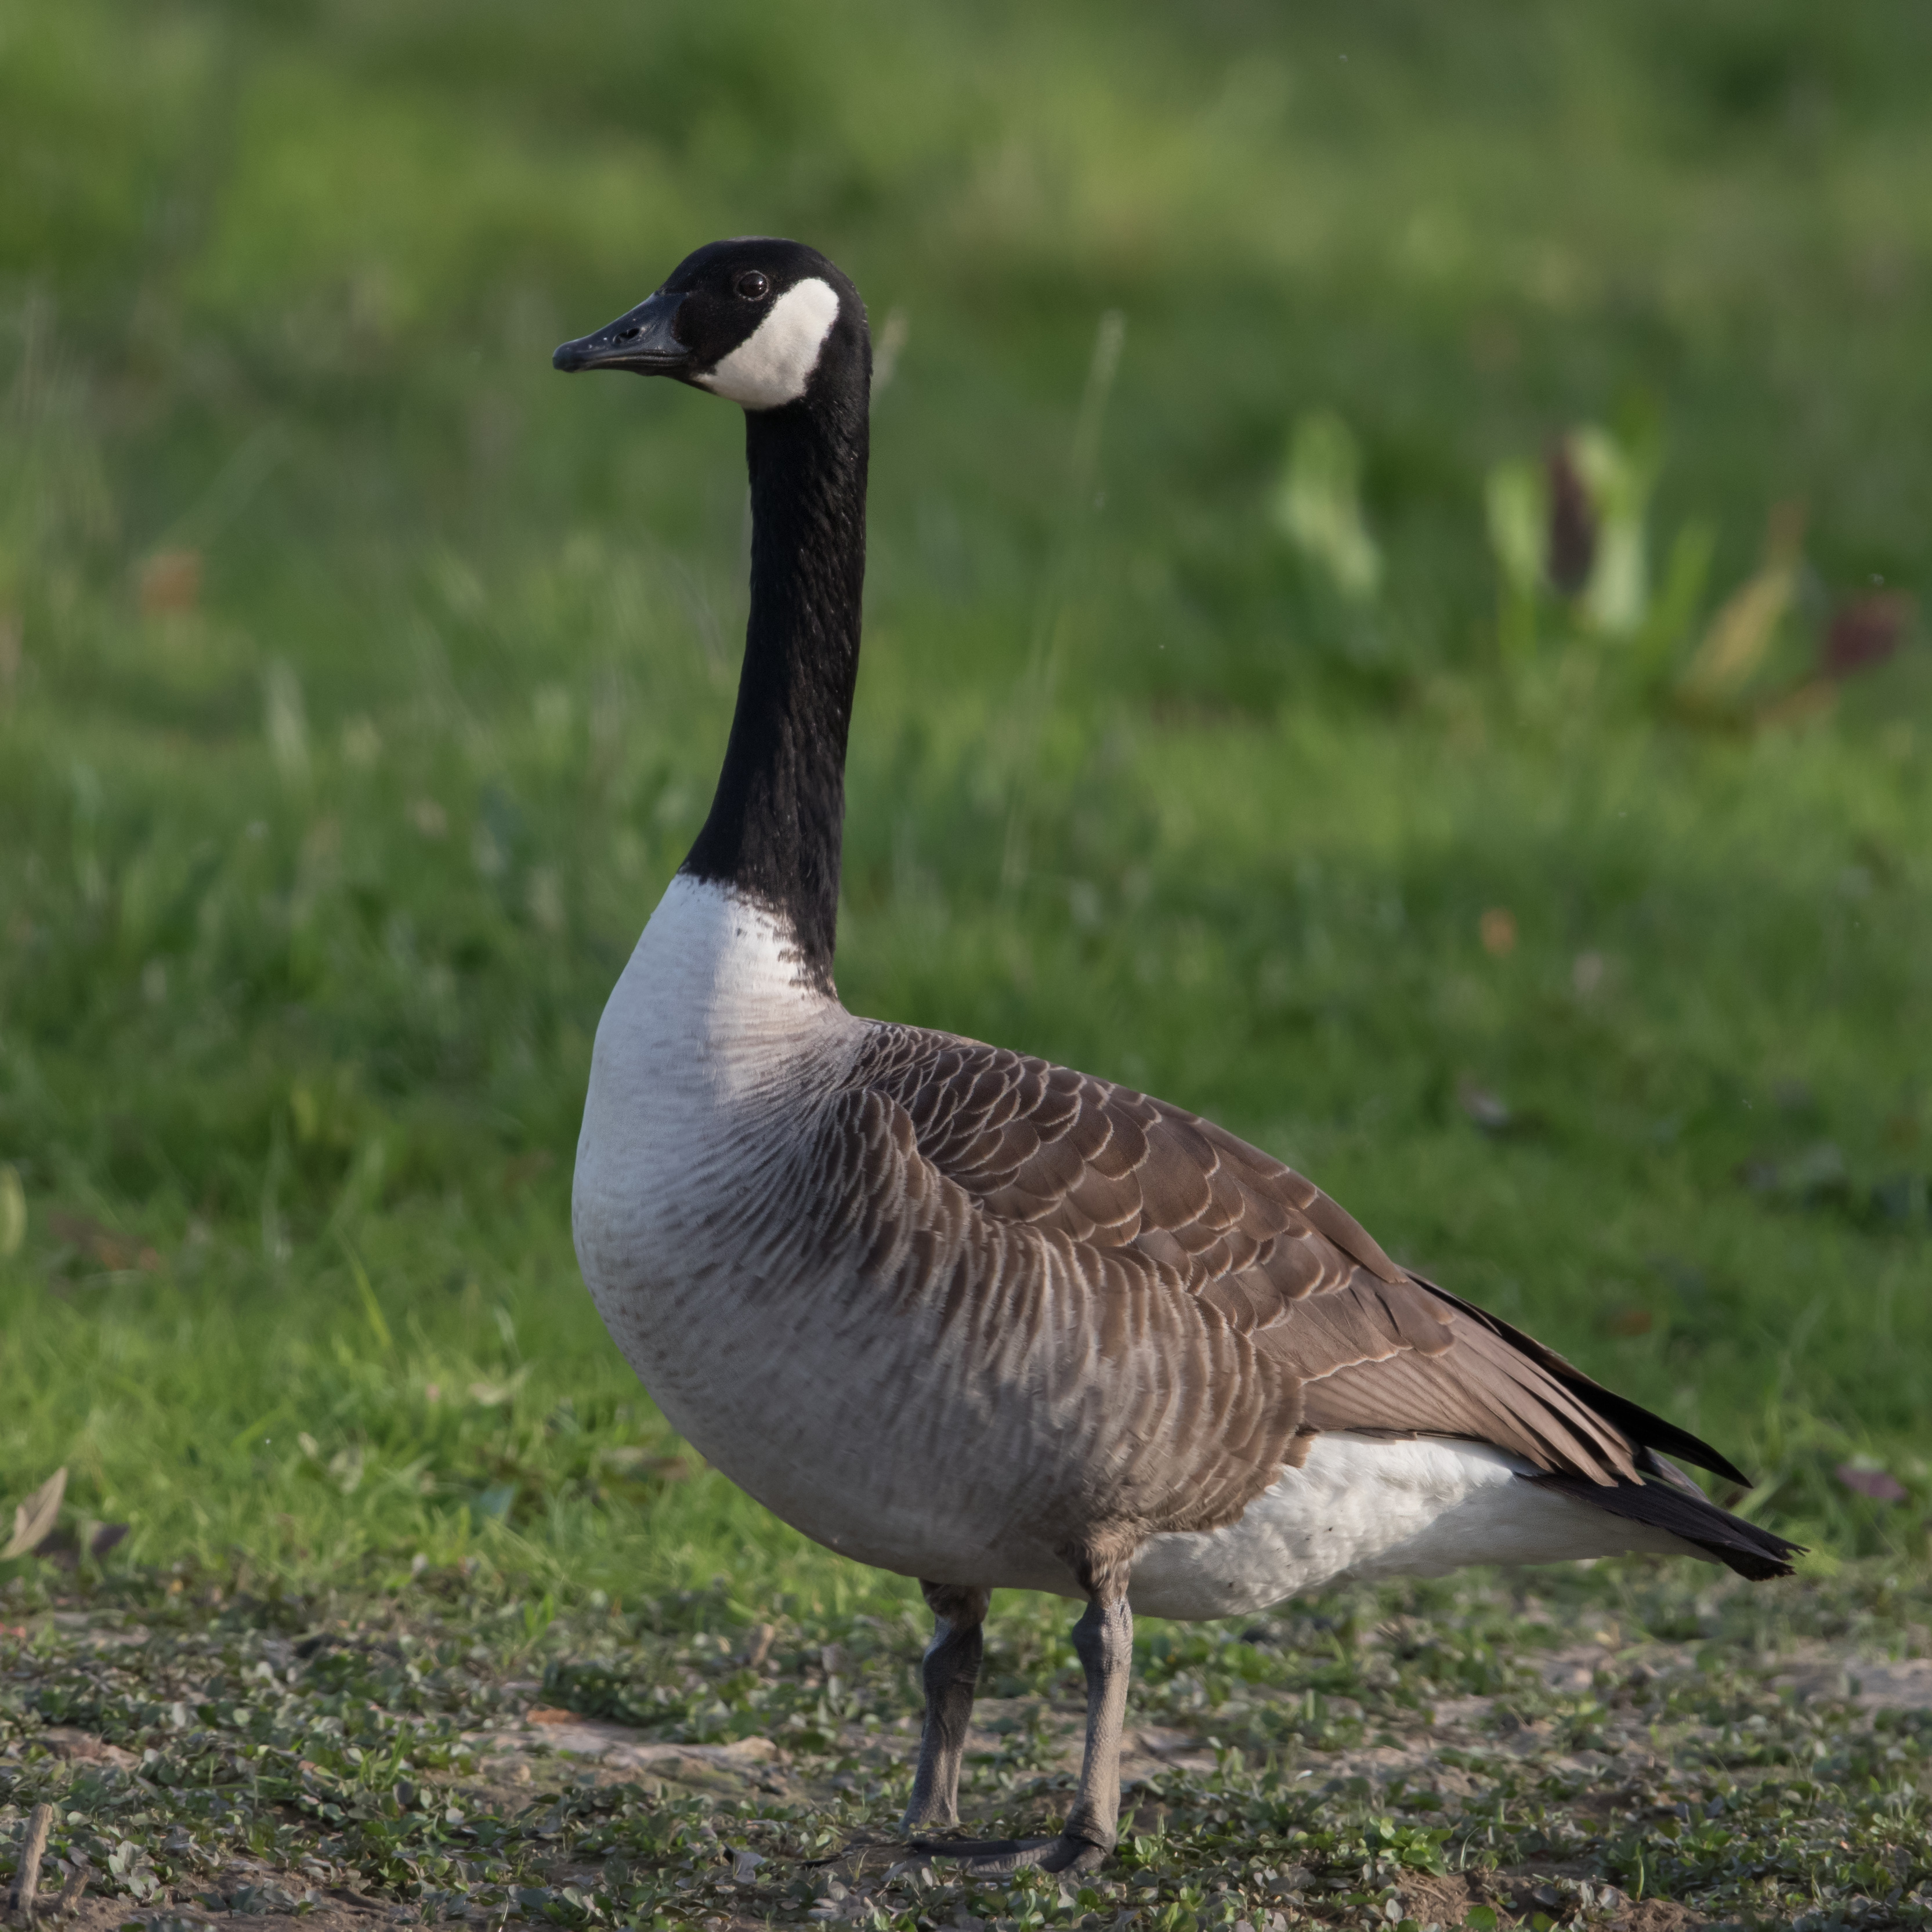 Canada goose (Branta canadensis). Photo taken by Andreas Trepte on May 11, 2015.